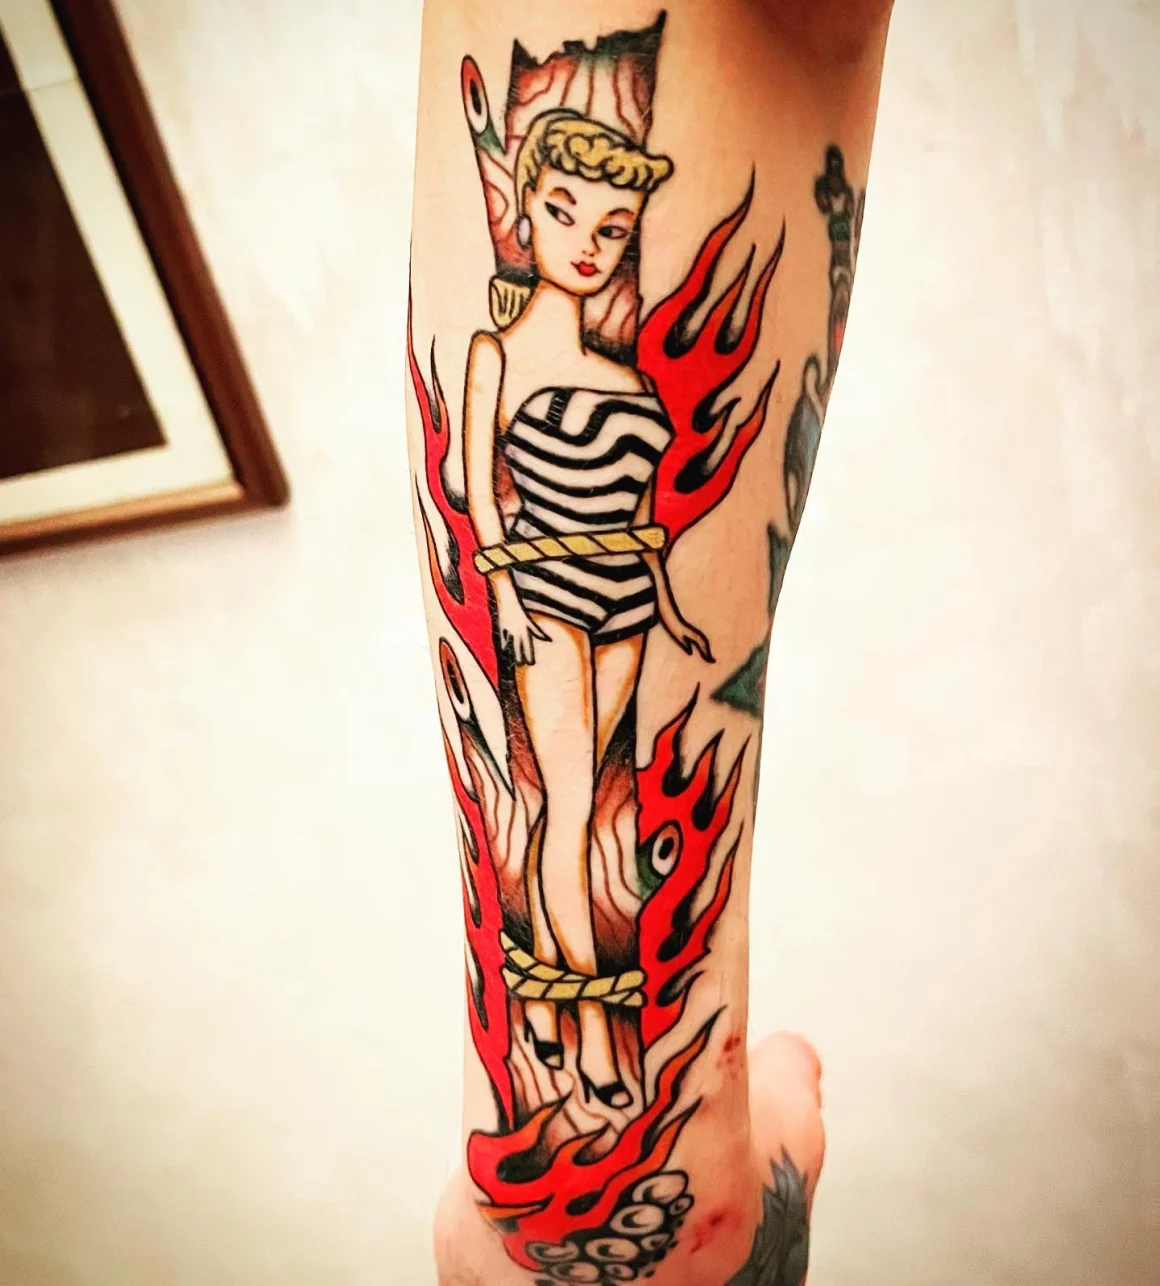 Barbie Tattoos: A Celebration of the Iconic Doll